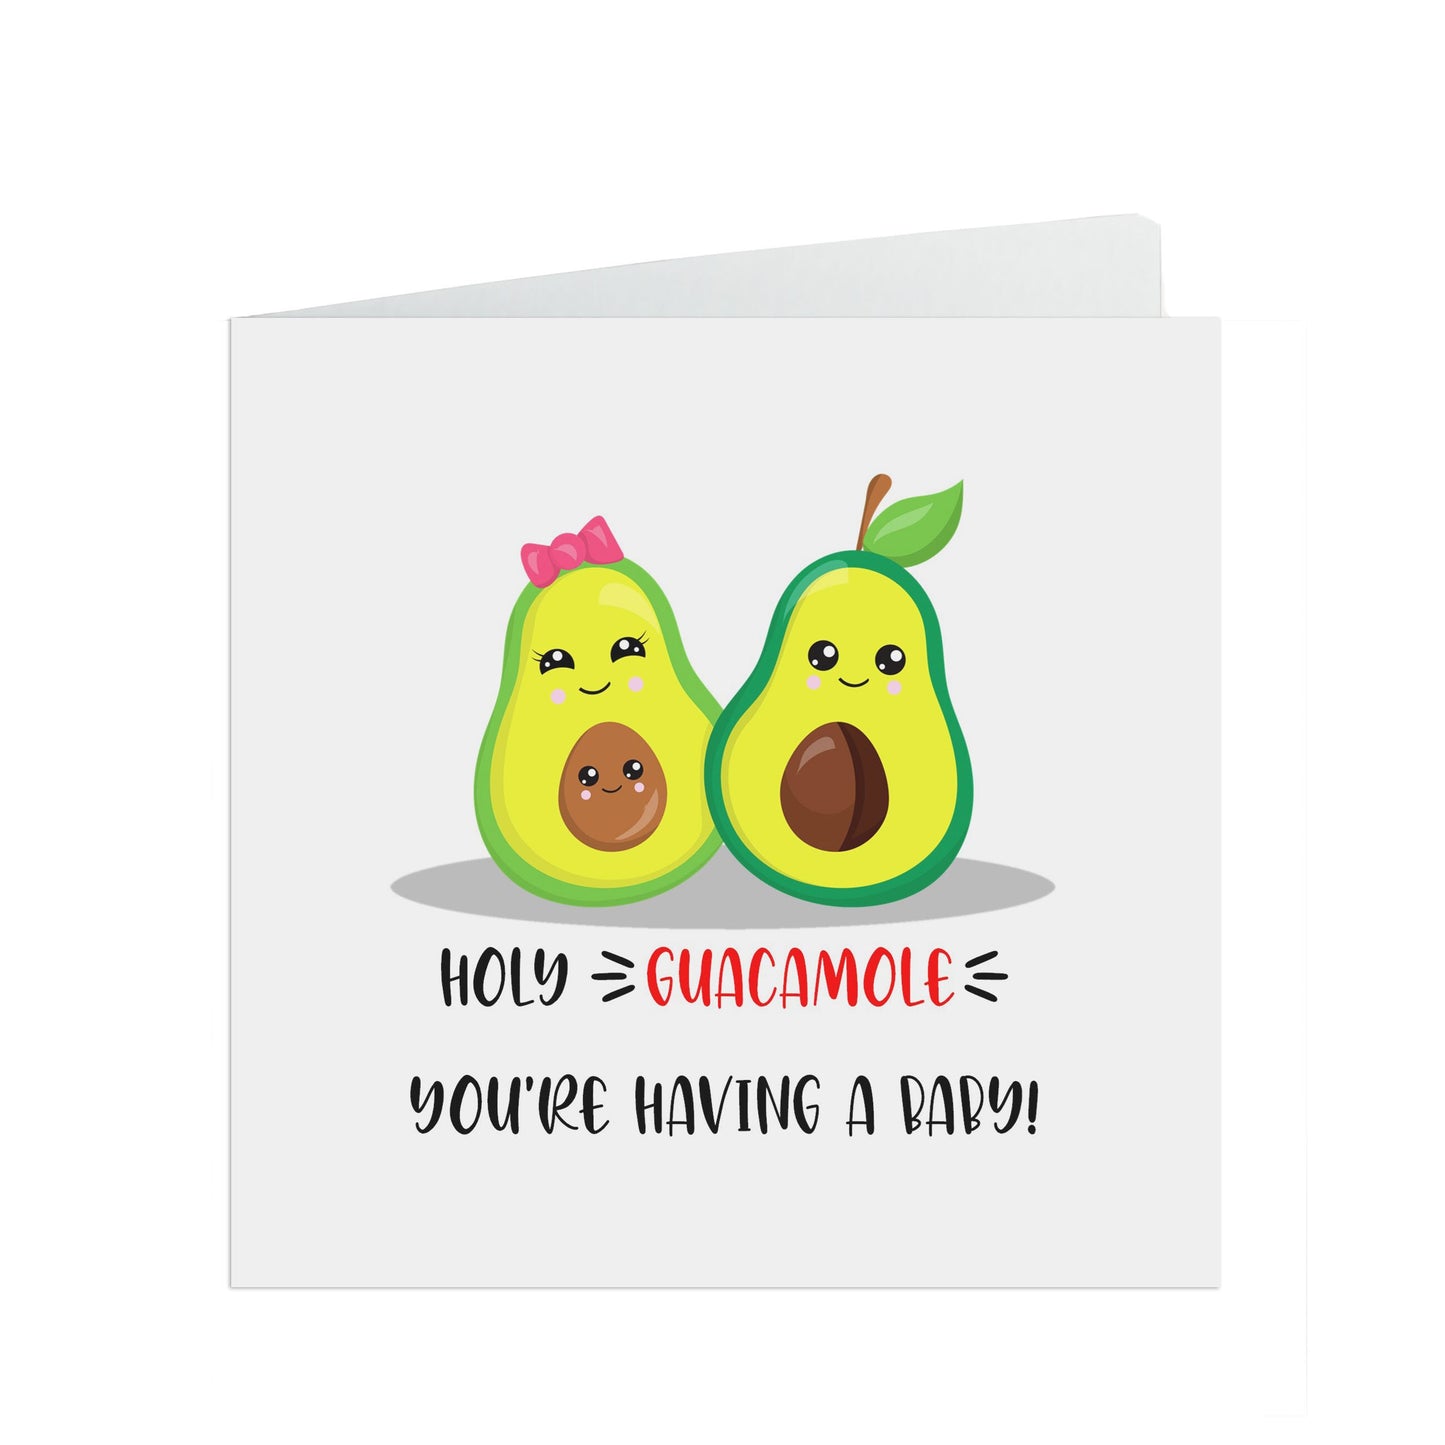 Holy Guacamole You're having a baby, Funny pregnancy avocado pun, foodie card